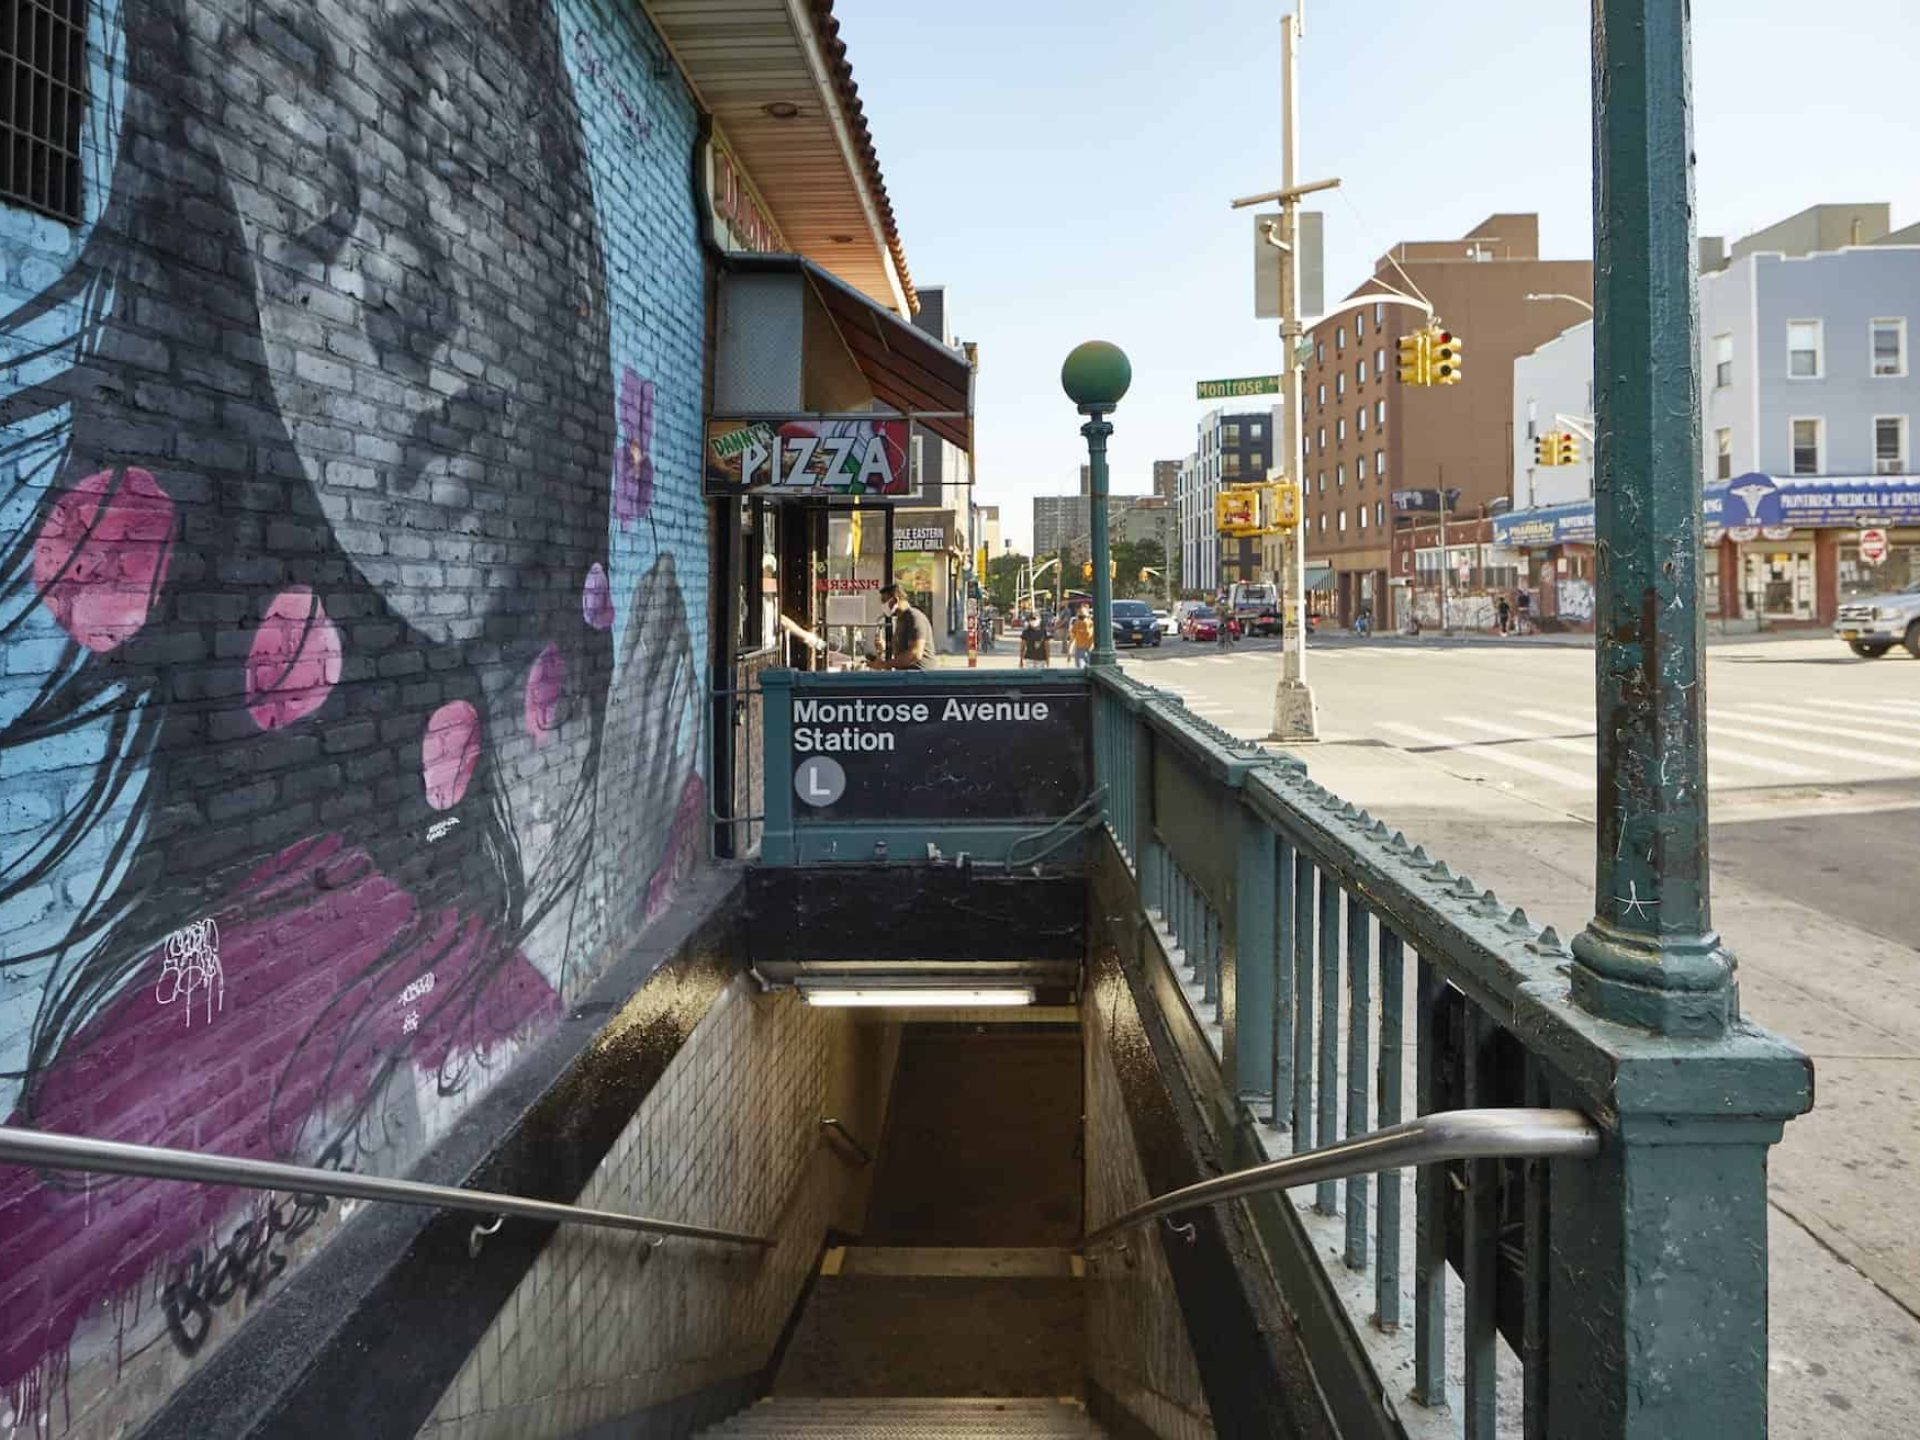 Looking down the stairs to the Montrose Avenue Station in Brooklyn. Steep stairwell with hand rails leading to the subway.